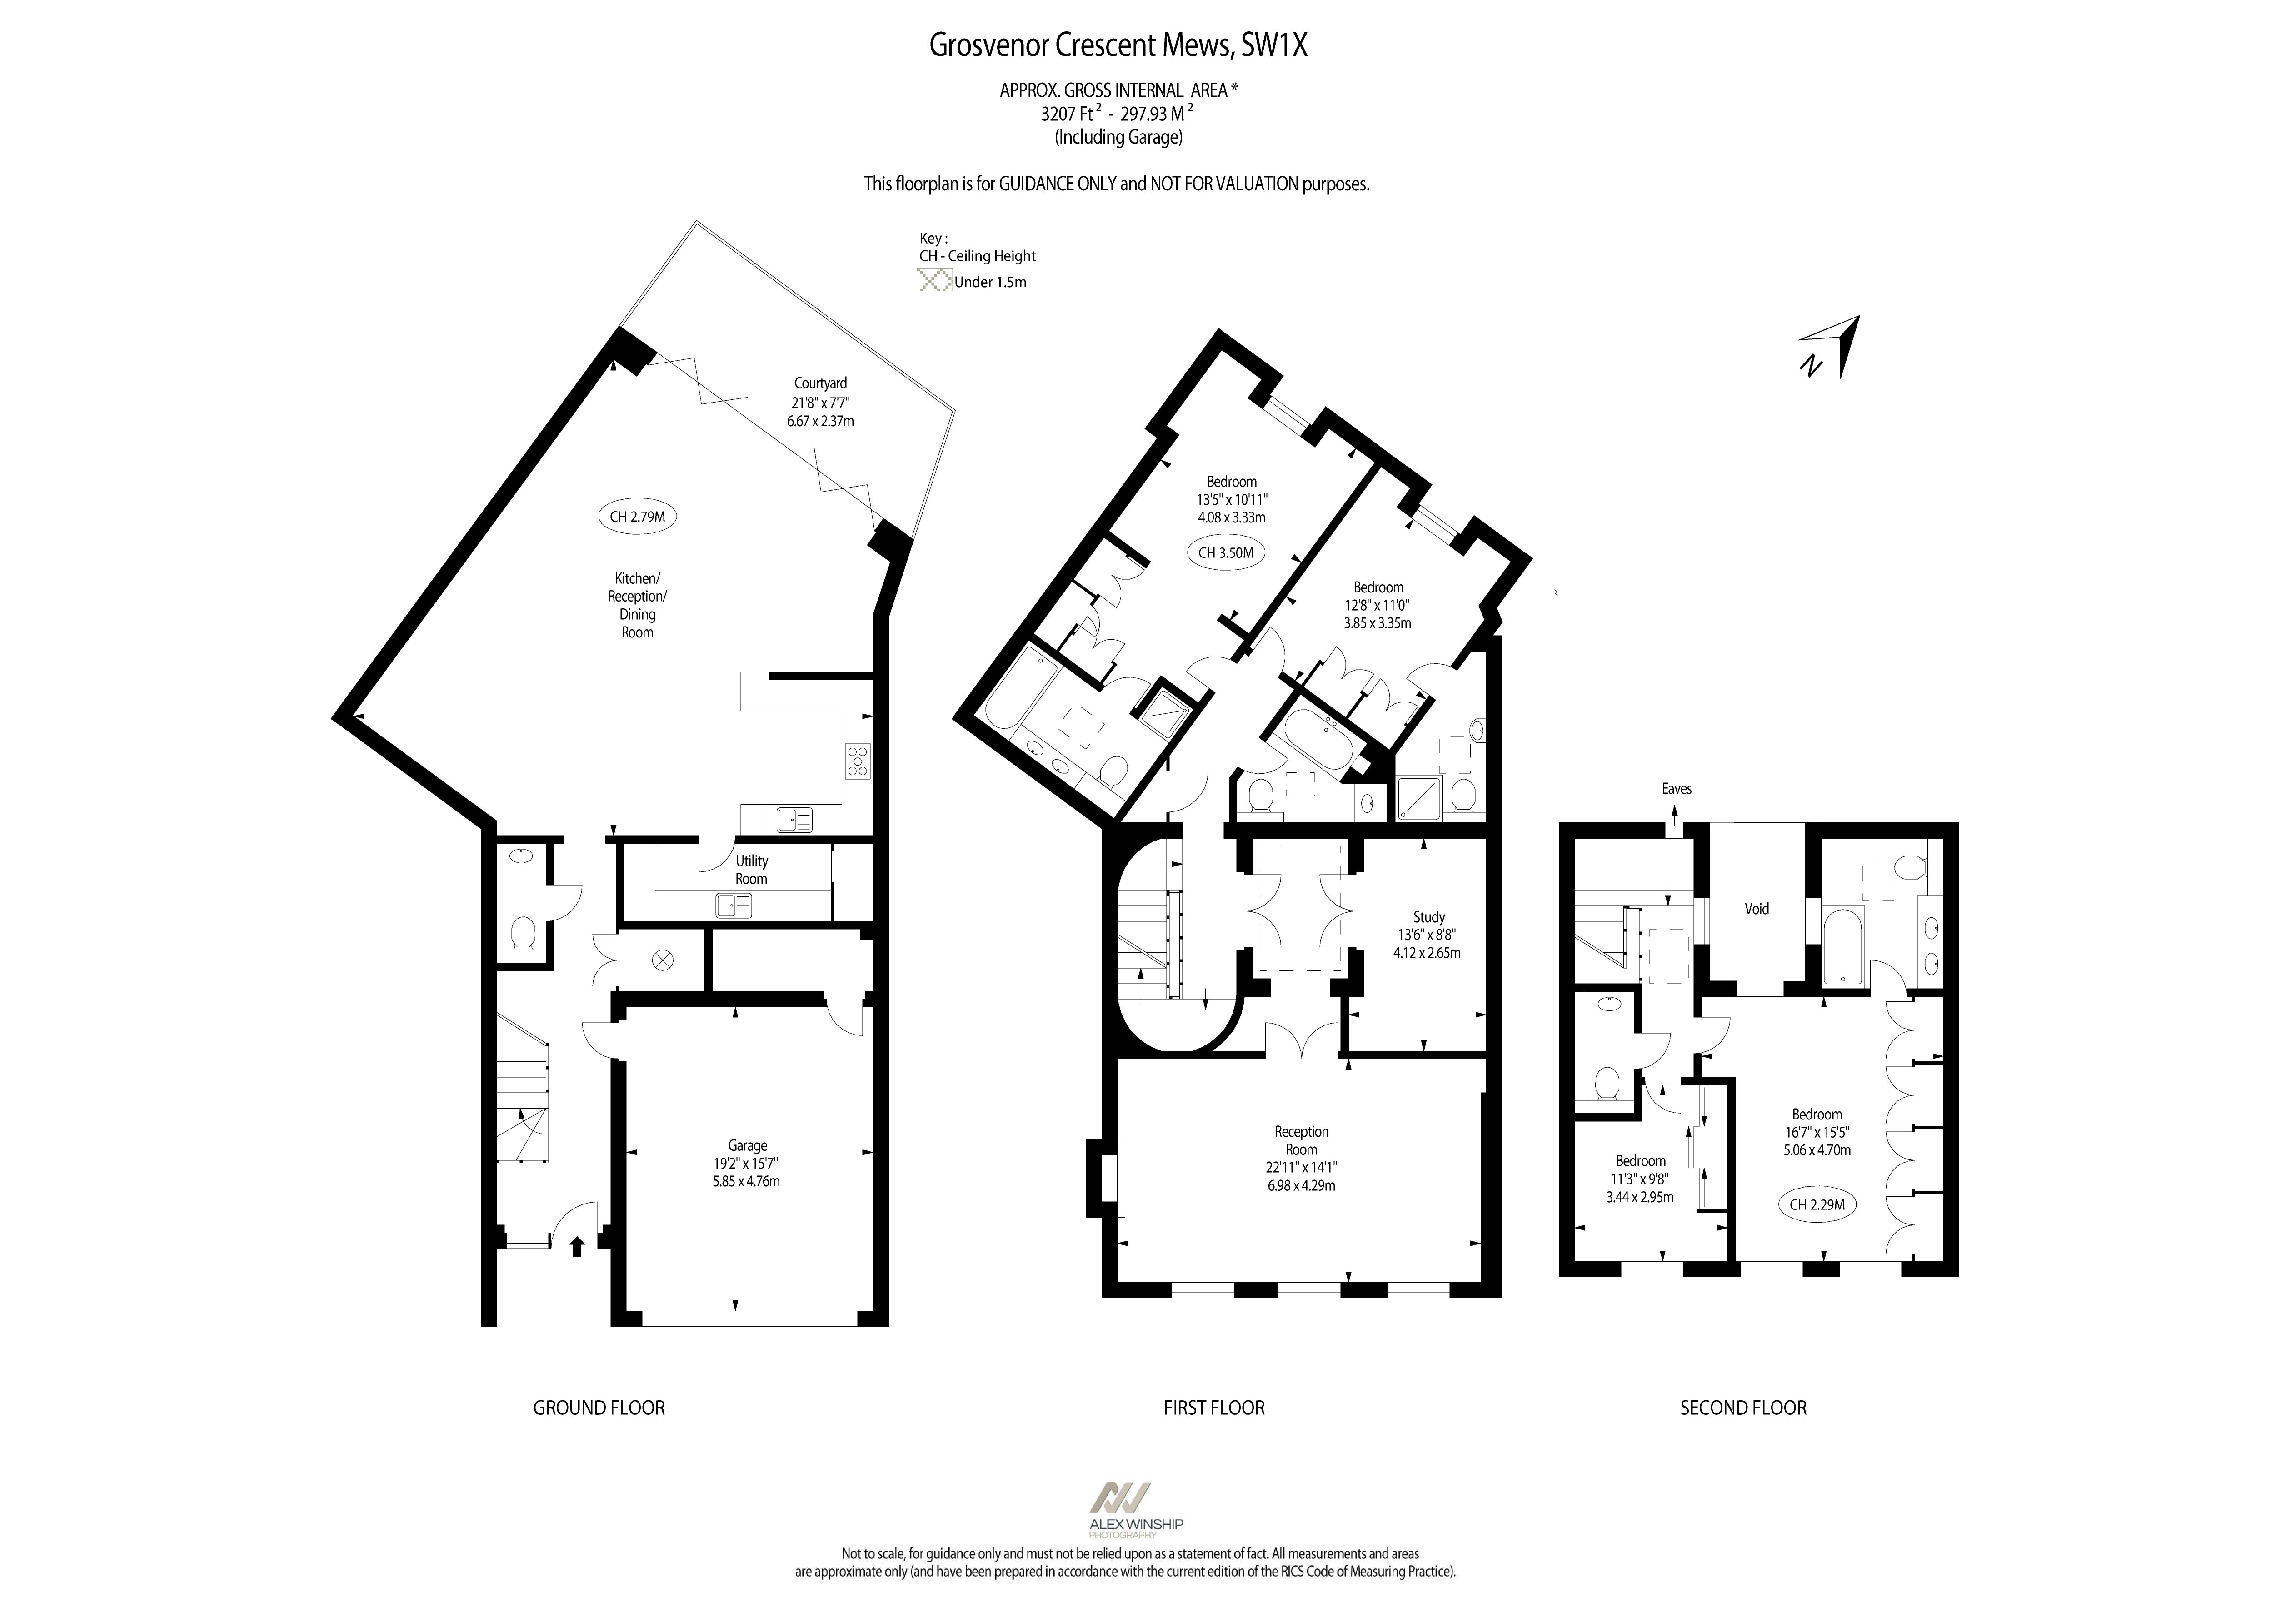 4 Bedrooms Detached house for sale in Grosvenor Crescent Mews, London SW1X